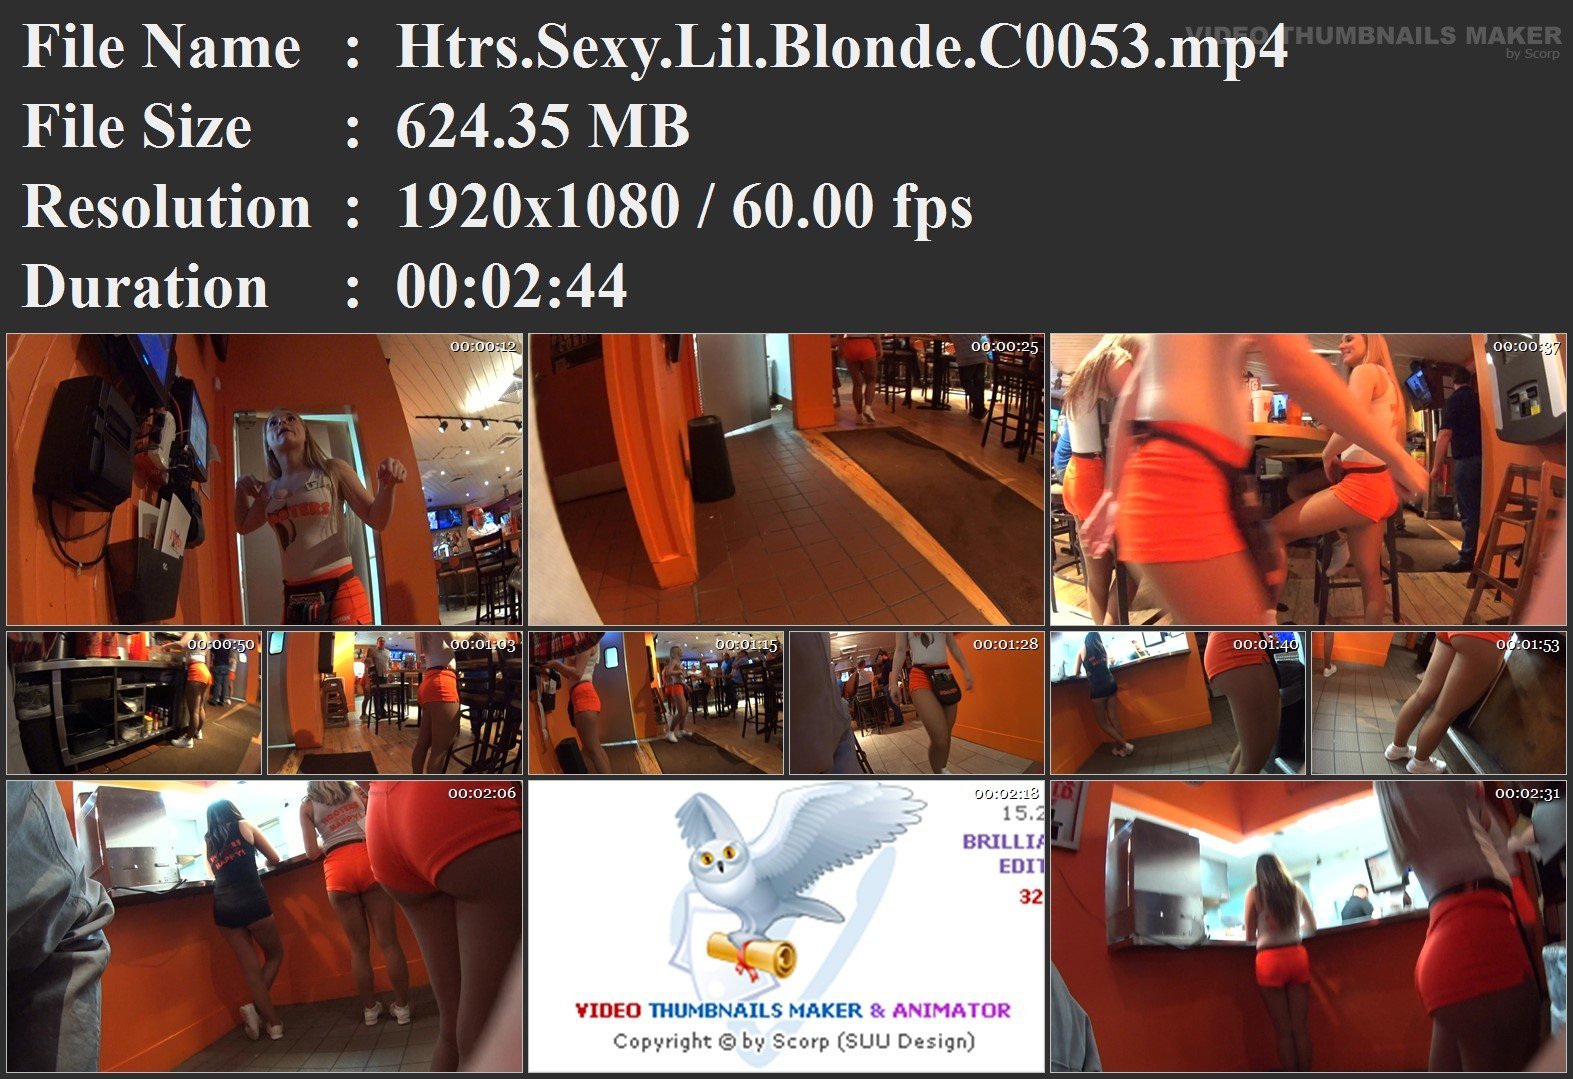 Htrs.Sexy.Lil.Blonde.C0053.mp4.jpg